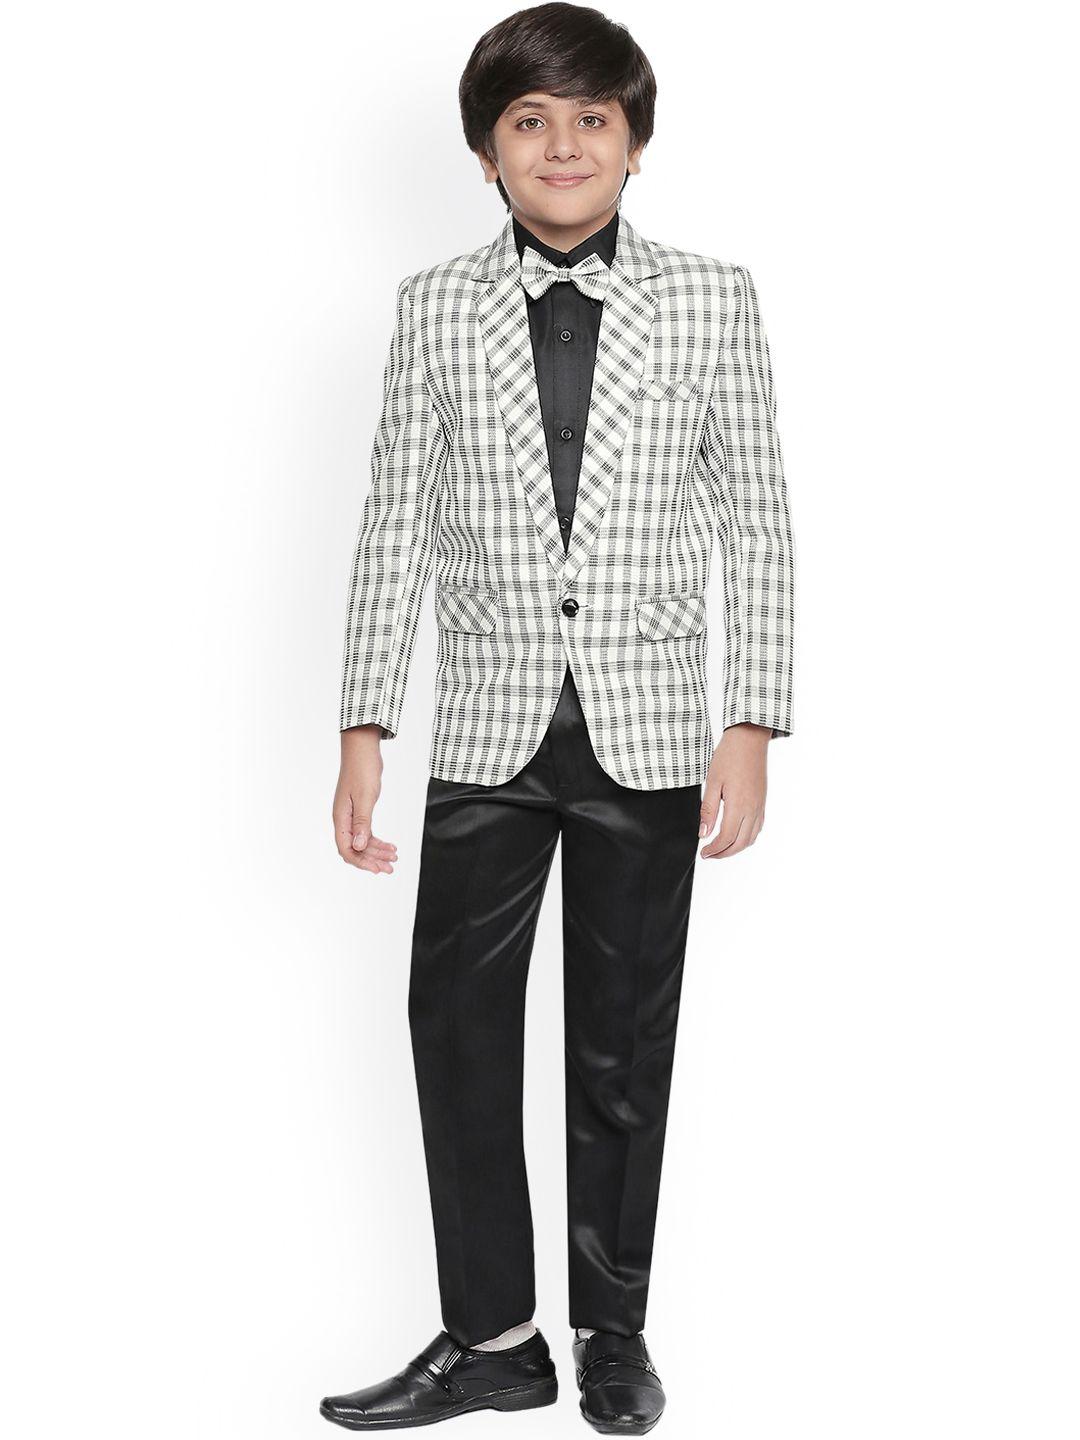 jeetethnics boys white & black checked 3-piece single-breasted partywear suit